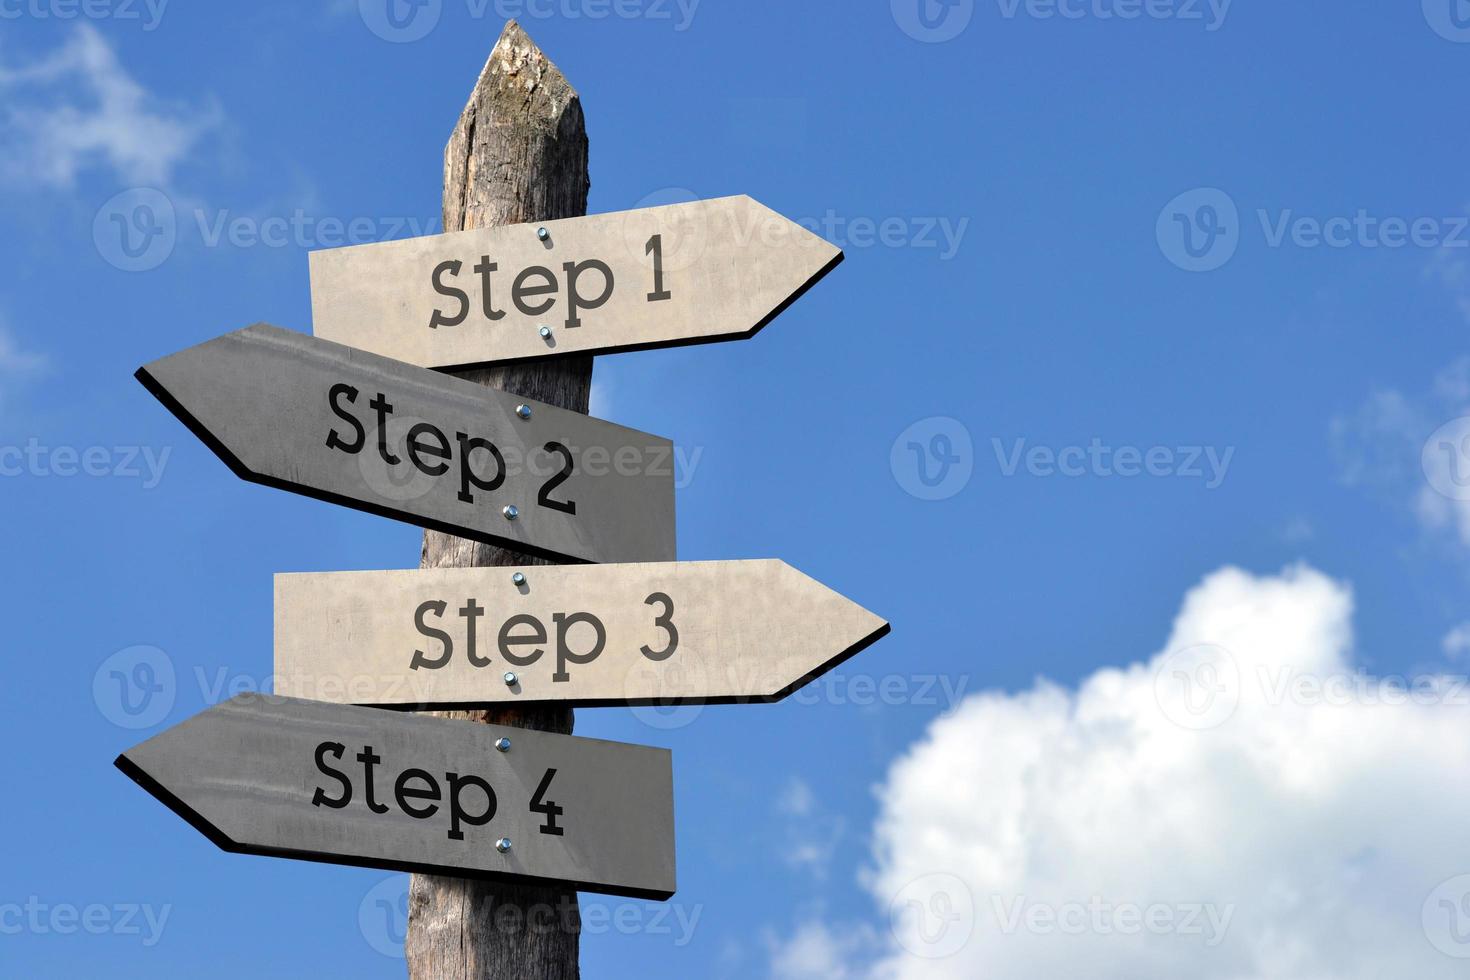 Step 1, 2, 3, 4 - Wooden Signpost with Four Arrows, Sky with Clouds photo